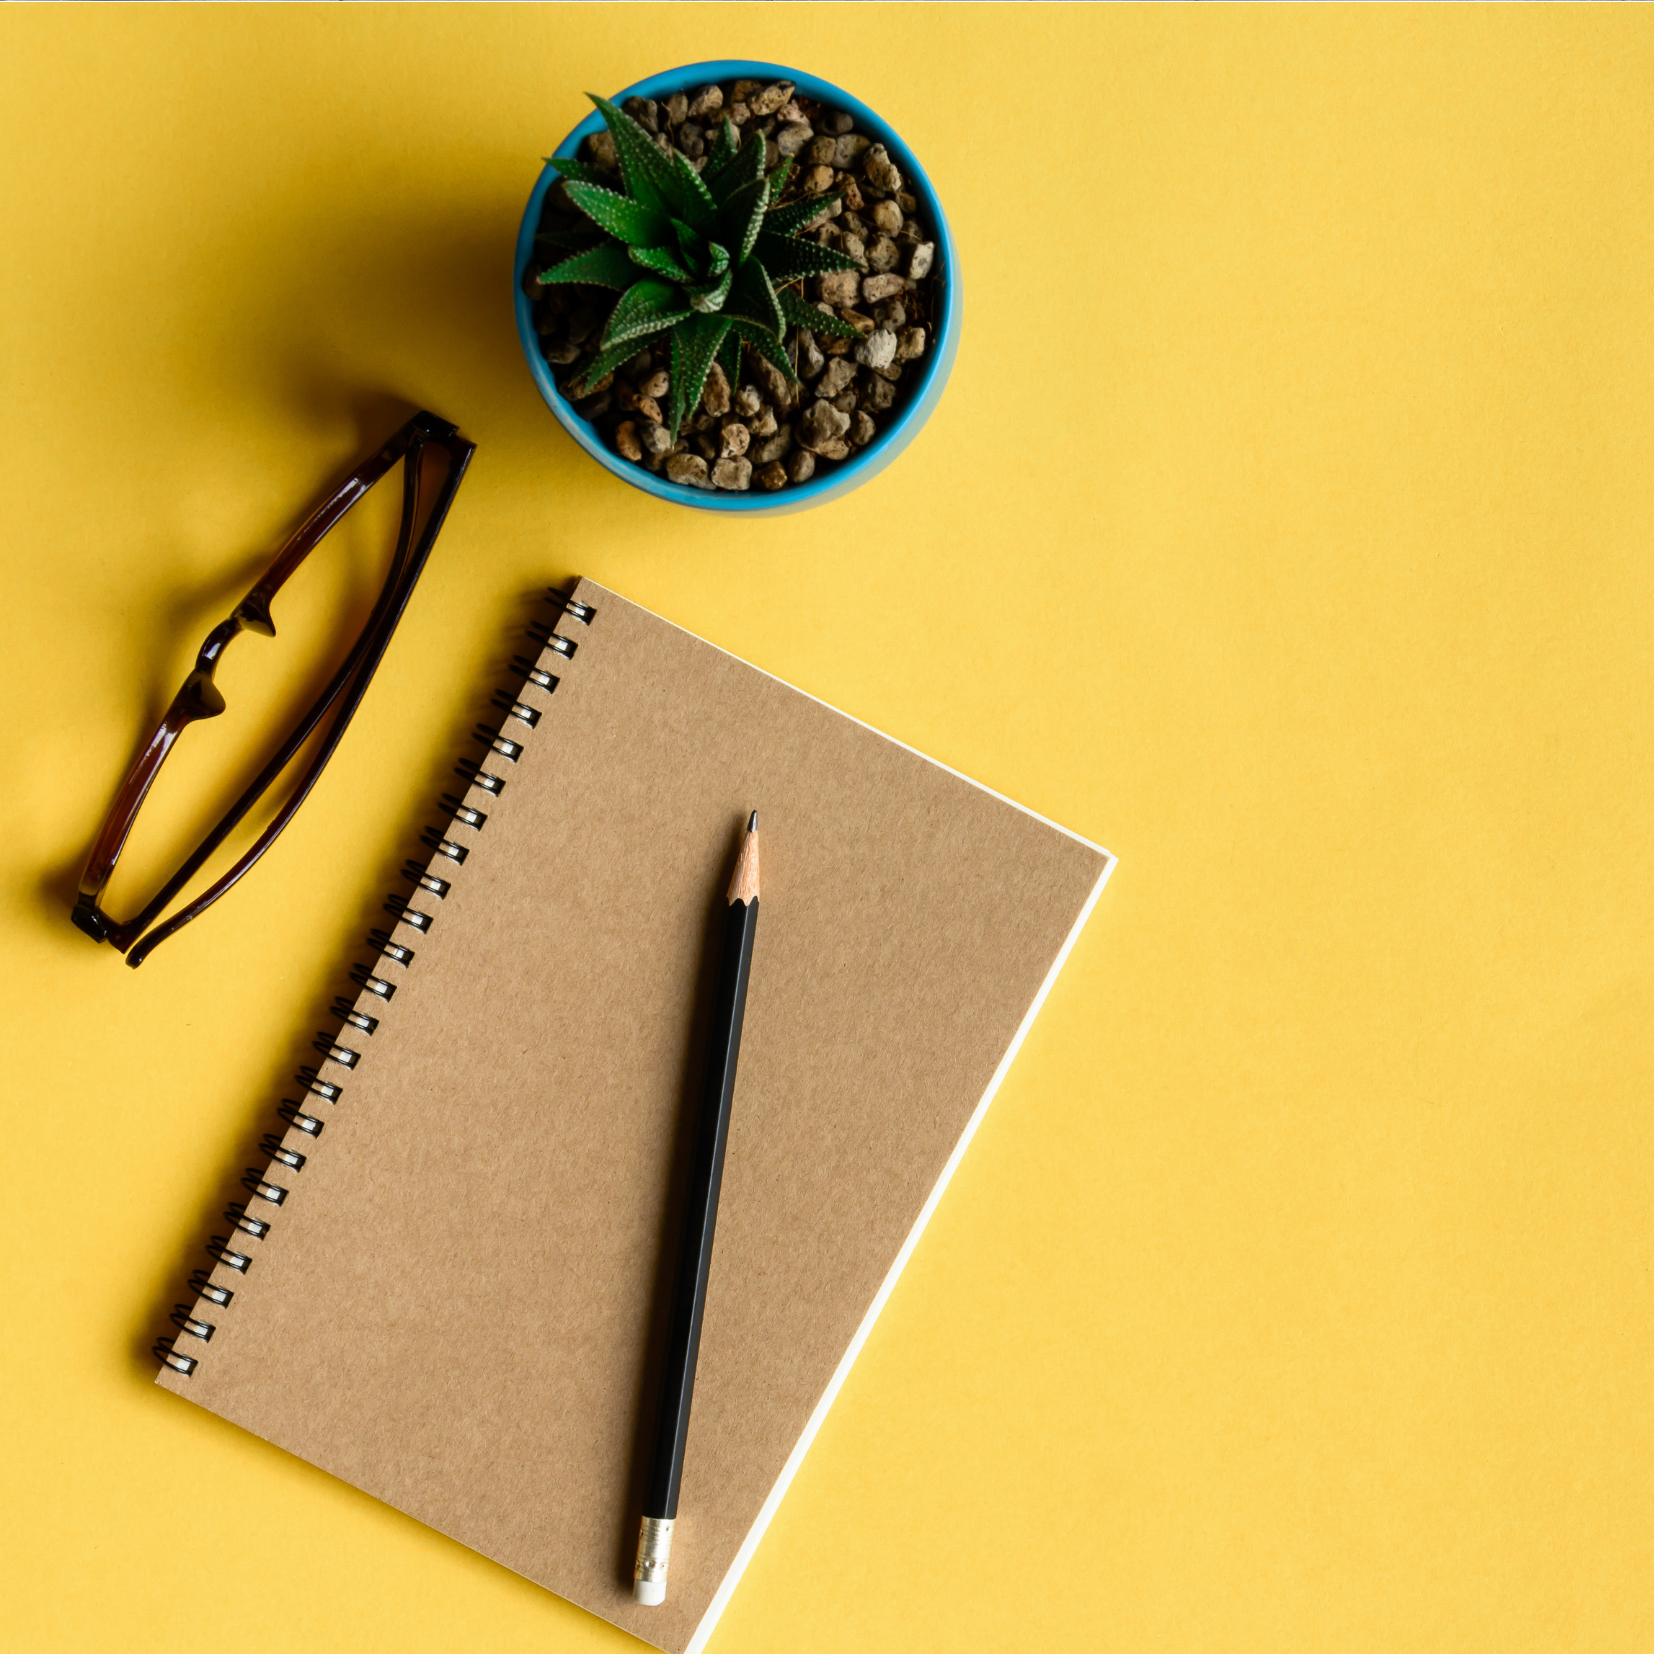 Yellow background with notebook, glasses & plant depicting Supervision